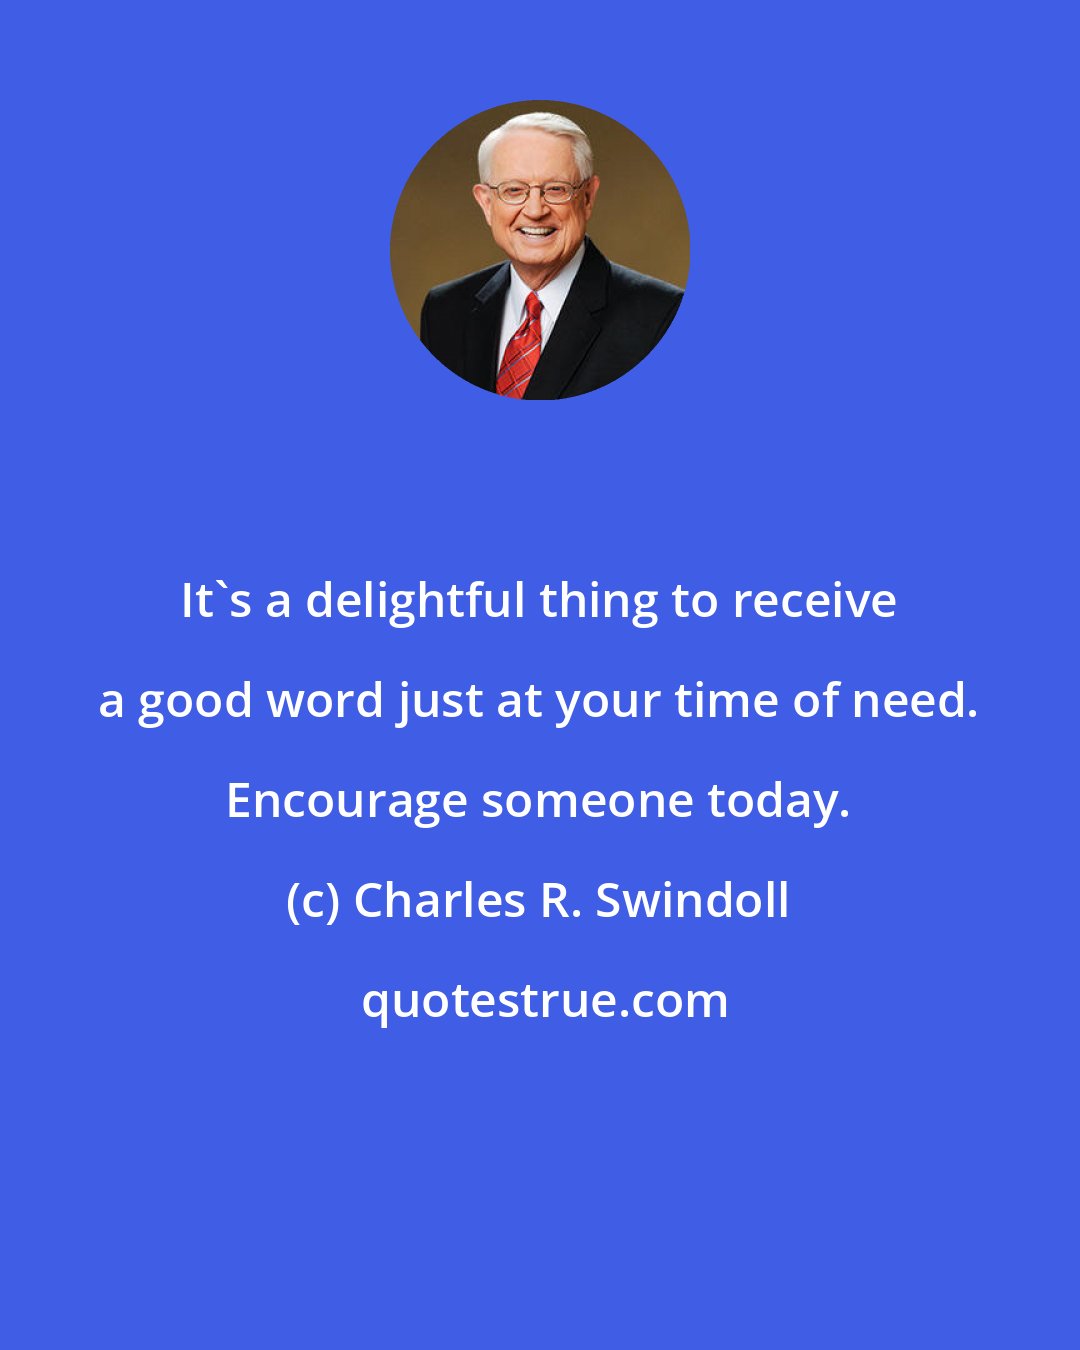 Charles R. Swindoll: It's a delightful thing to receive a good word just at your time of need. Encourage someone today.